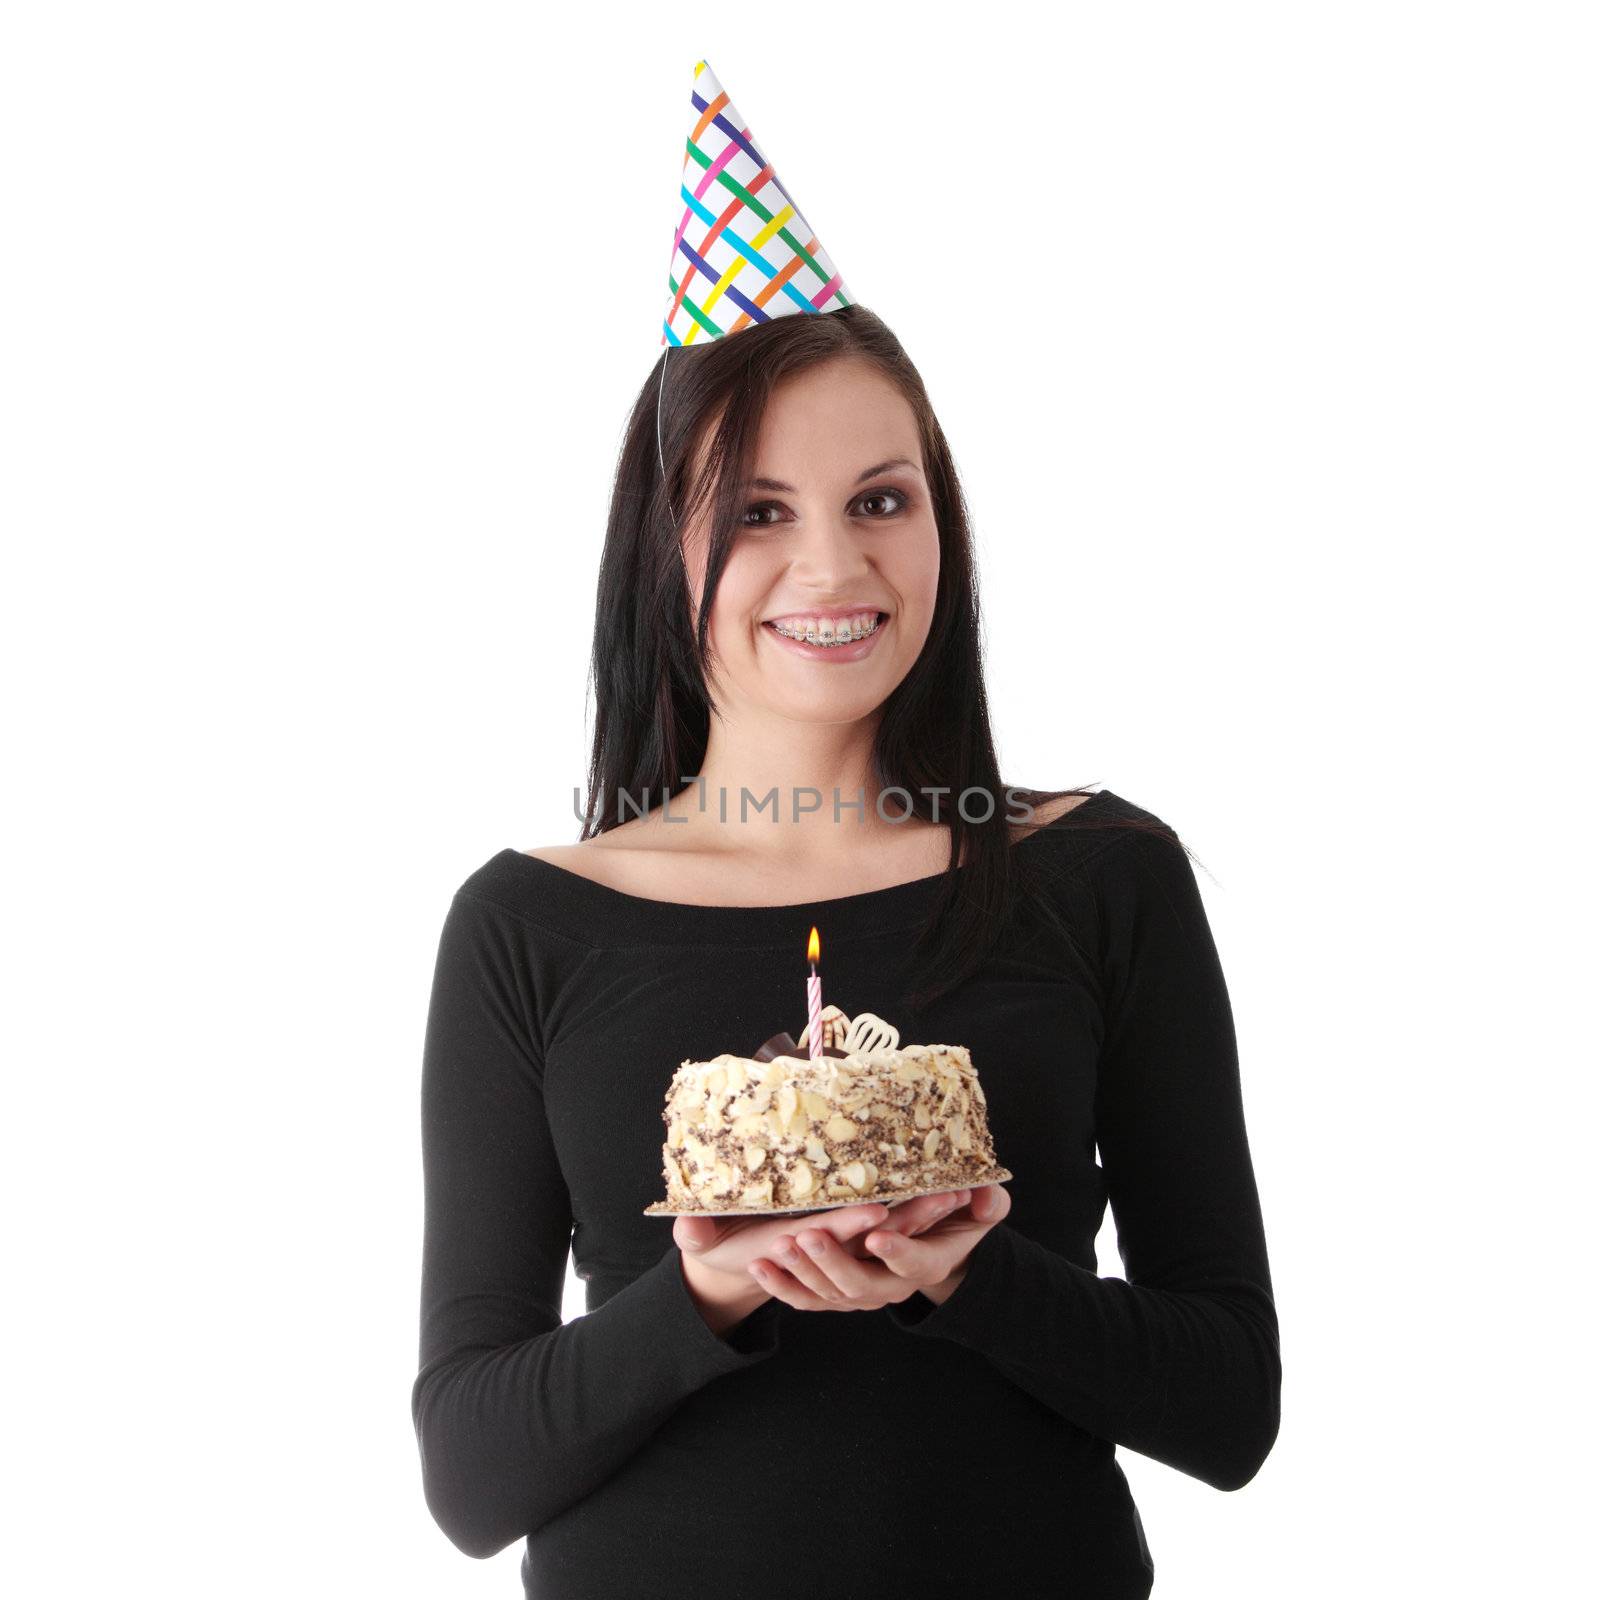 Beautiful young woman with birthday cake isolated on white background